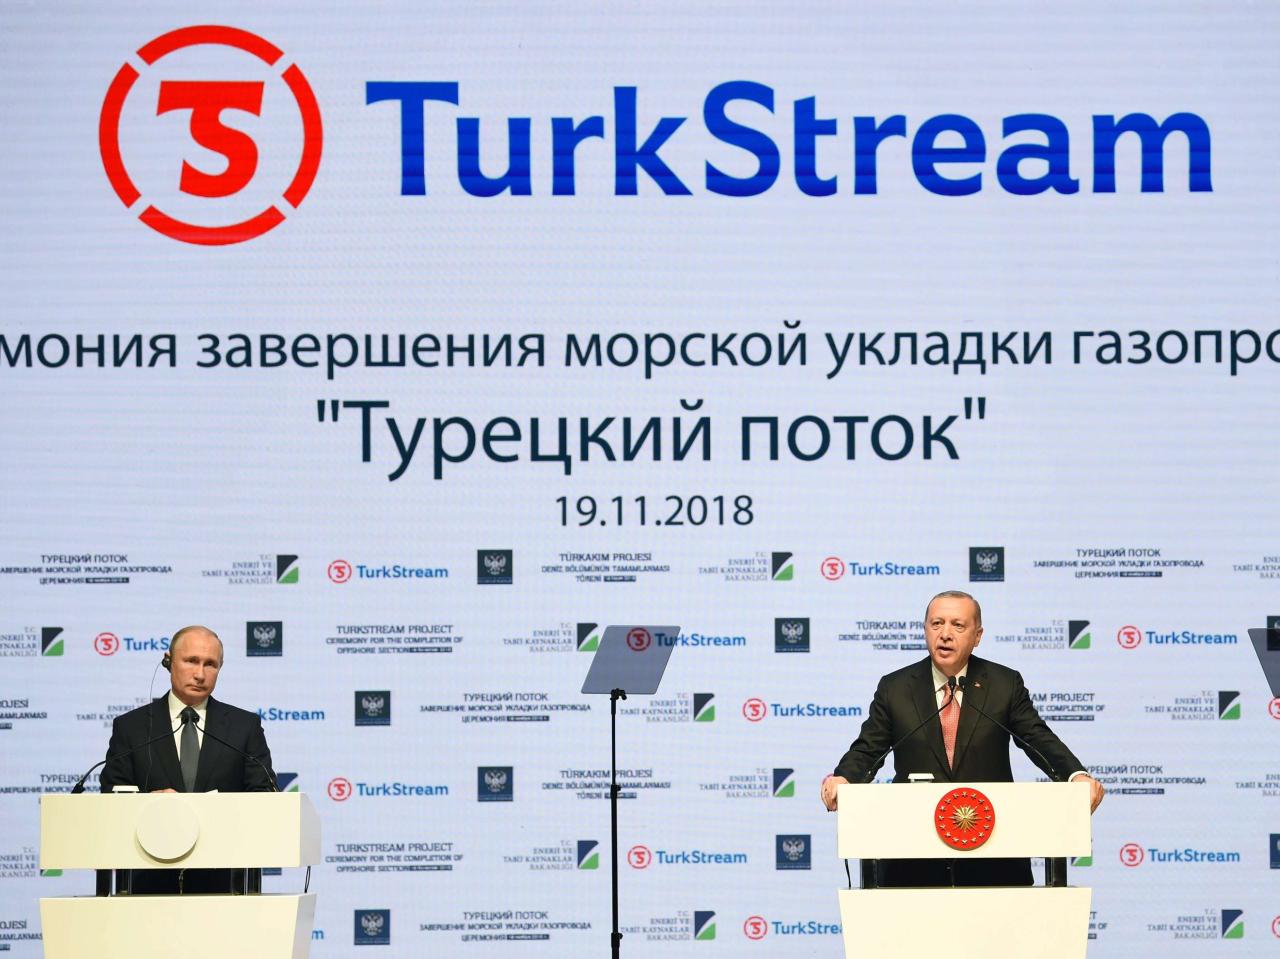 Offshore part of Turkish Stream solemnly opens